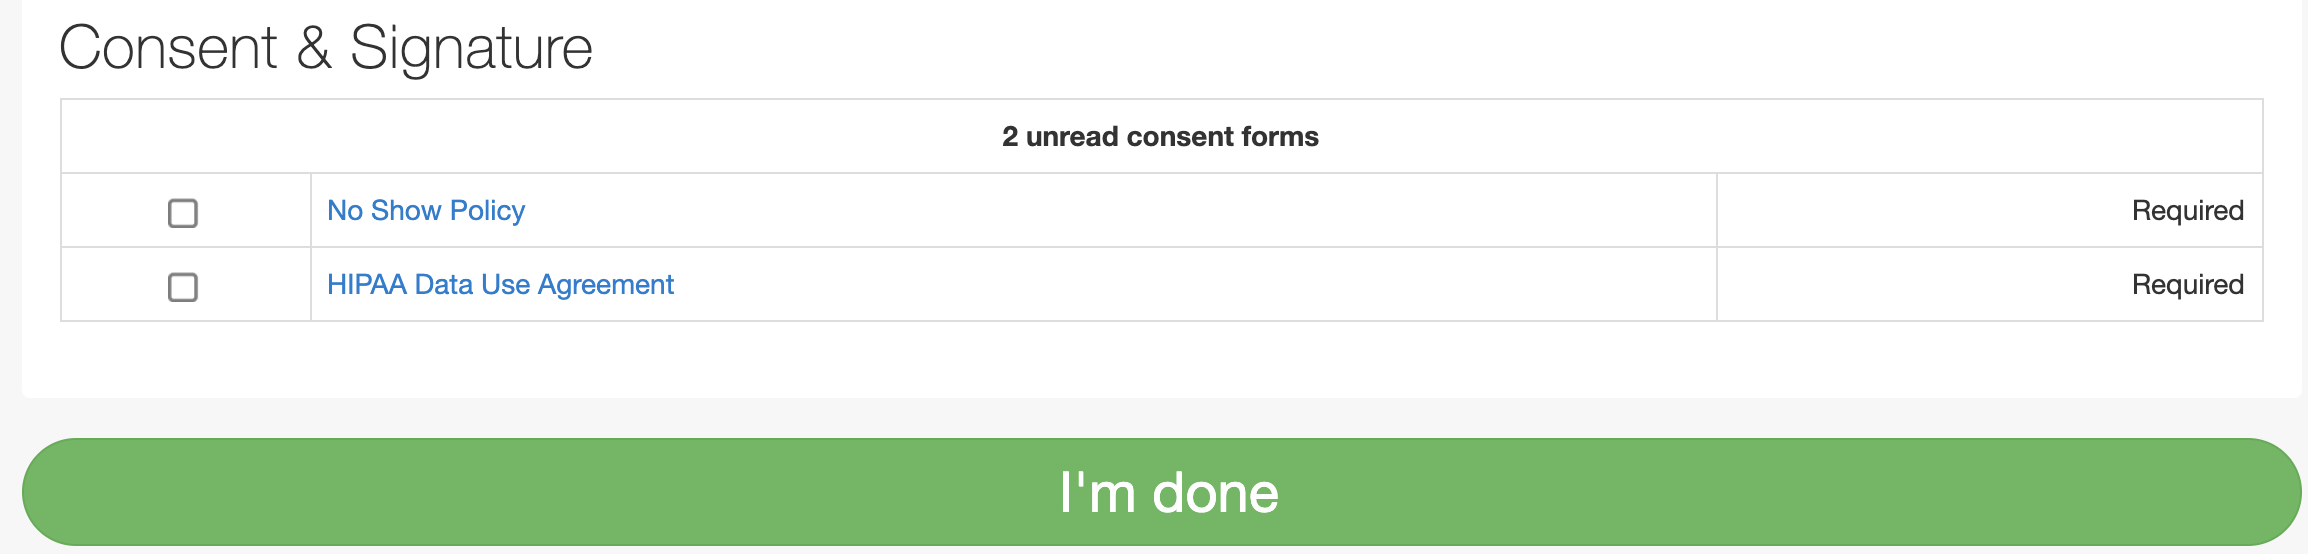 Onpatient_Check_In_Onpatient_Forms_Im_Done.png